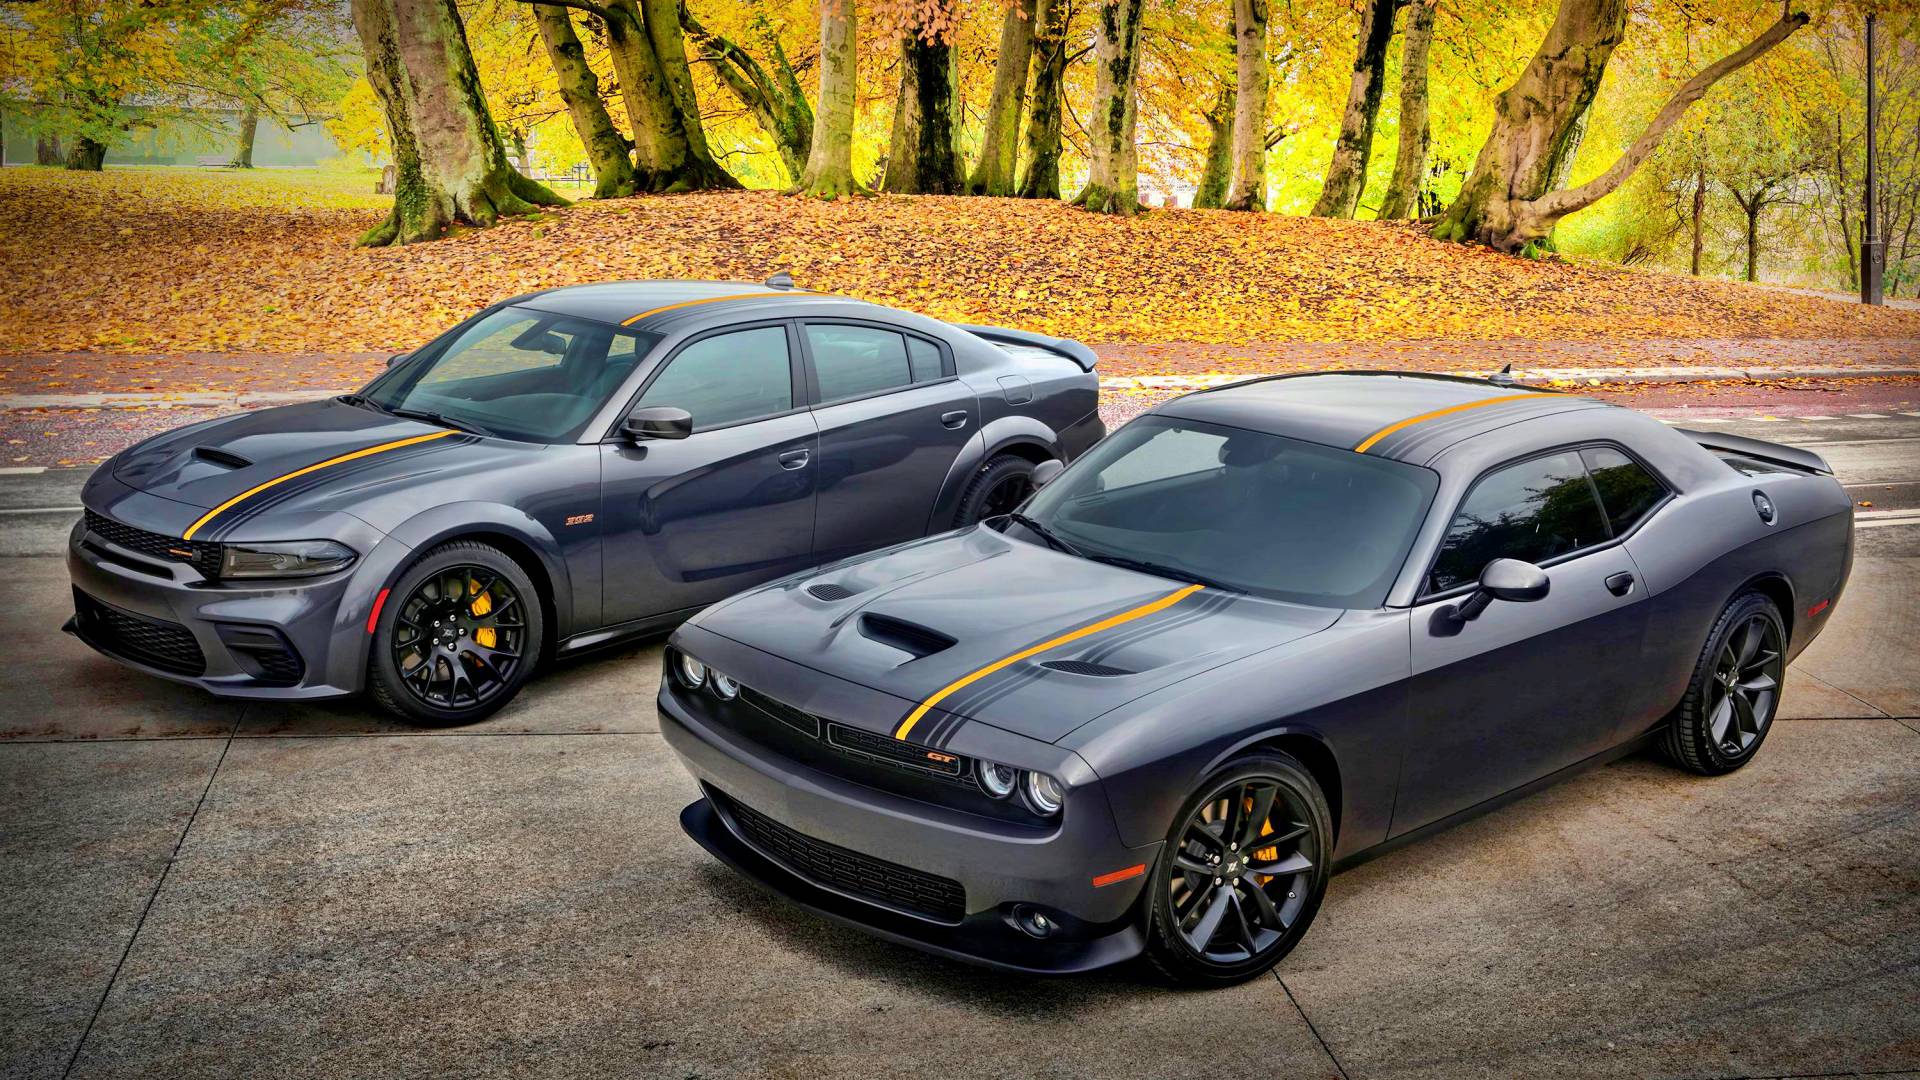 Dodge Charger and Challenger